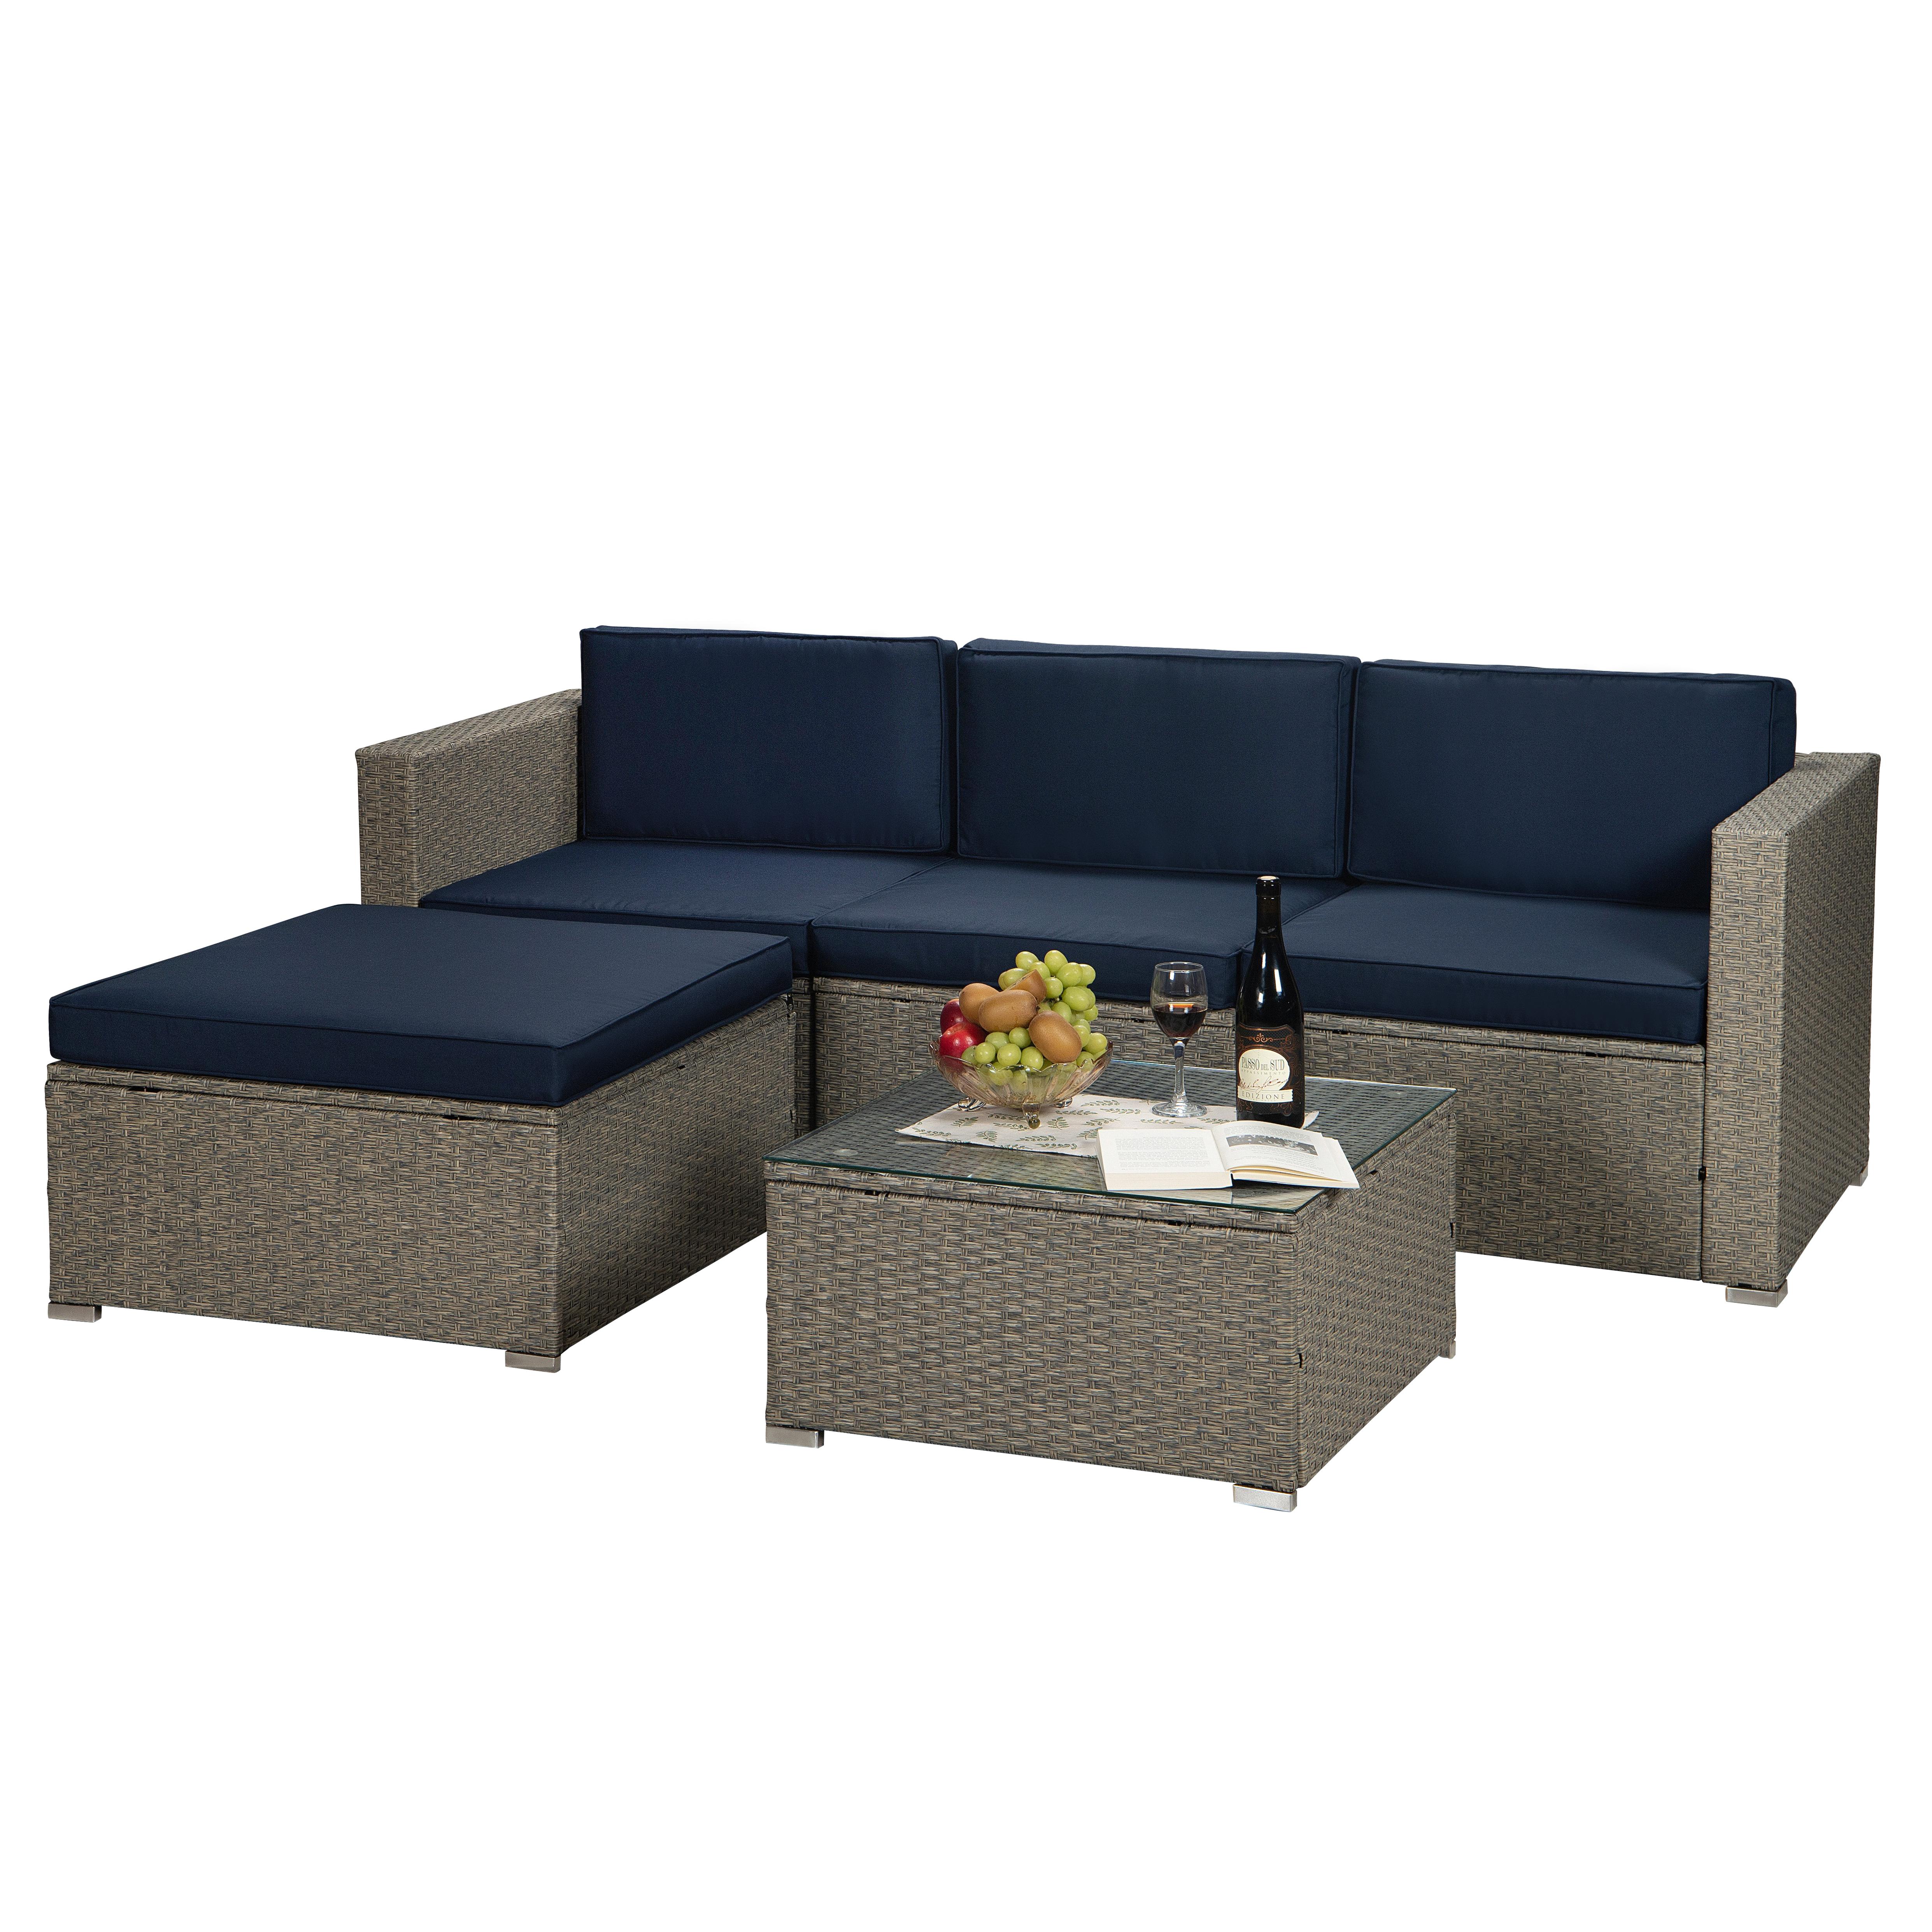 5 Pieces Patio Furniture Sets, iRerts Rattan Wicker Patio Sofa Sectional Set, Deck Furniture Set with Navy Cushion, Ottoman, Glass Table, Outdoor Patio Sofa Sets for Garden, Backyard, Porch, Gray - image 2 of 10